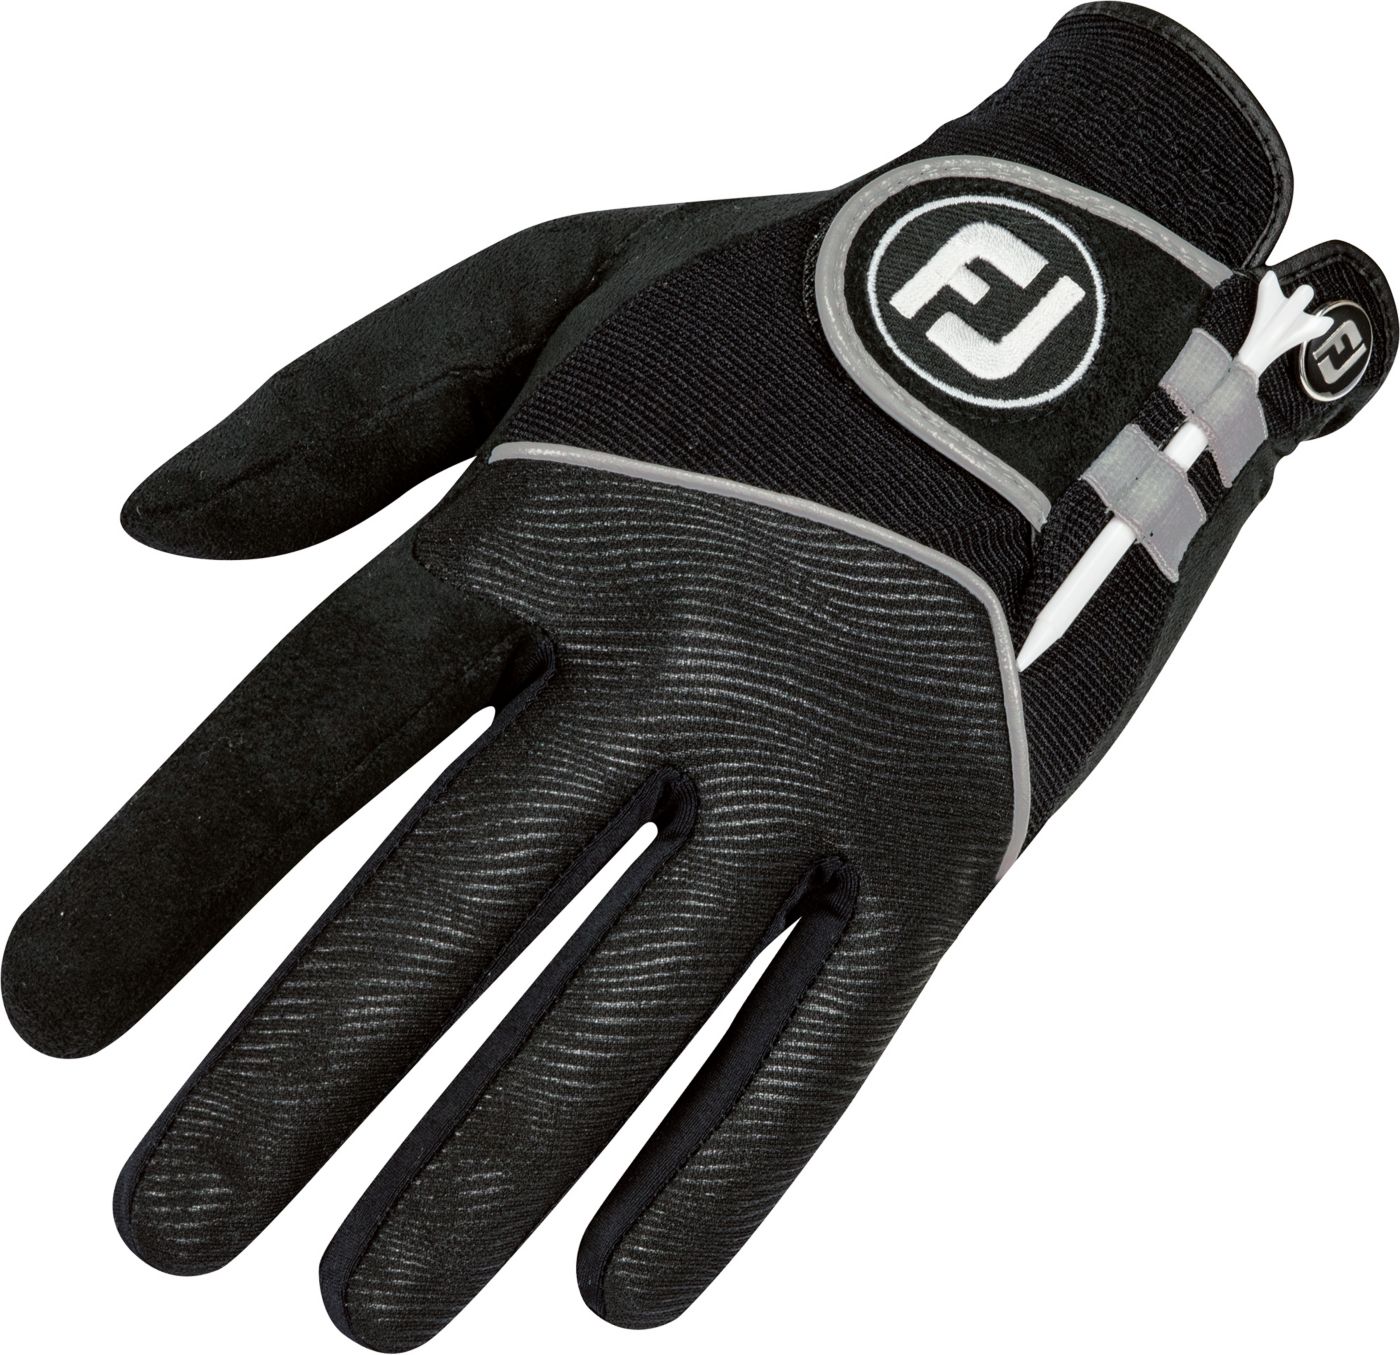 keylord gloves